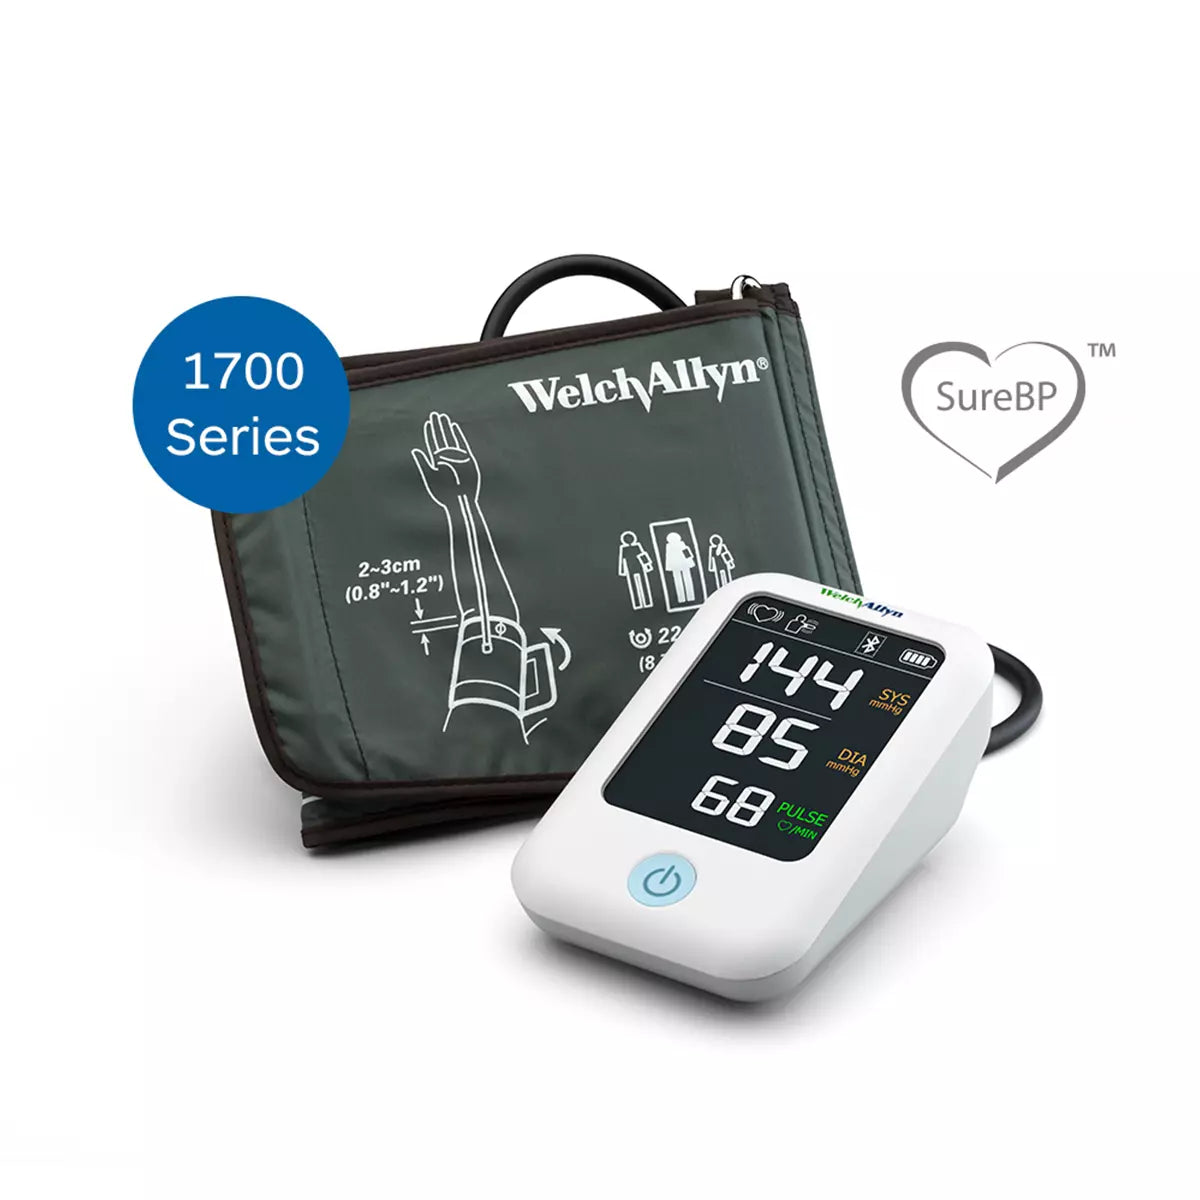 ADC Advantage Connect Digital Blood Pressure Monitor with Bluetooth